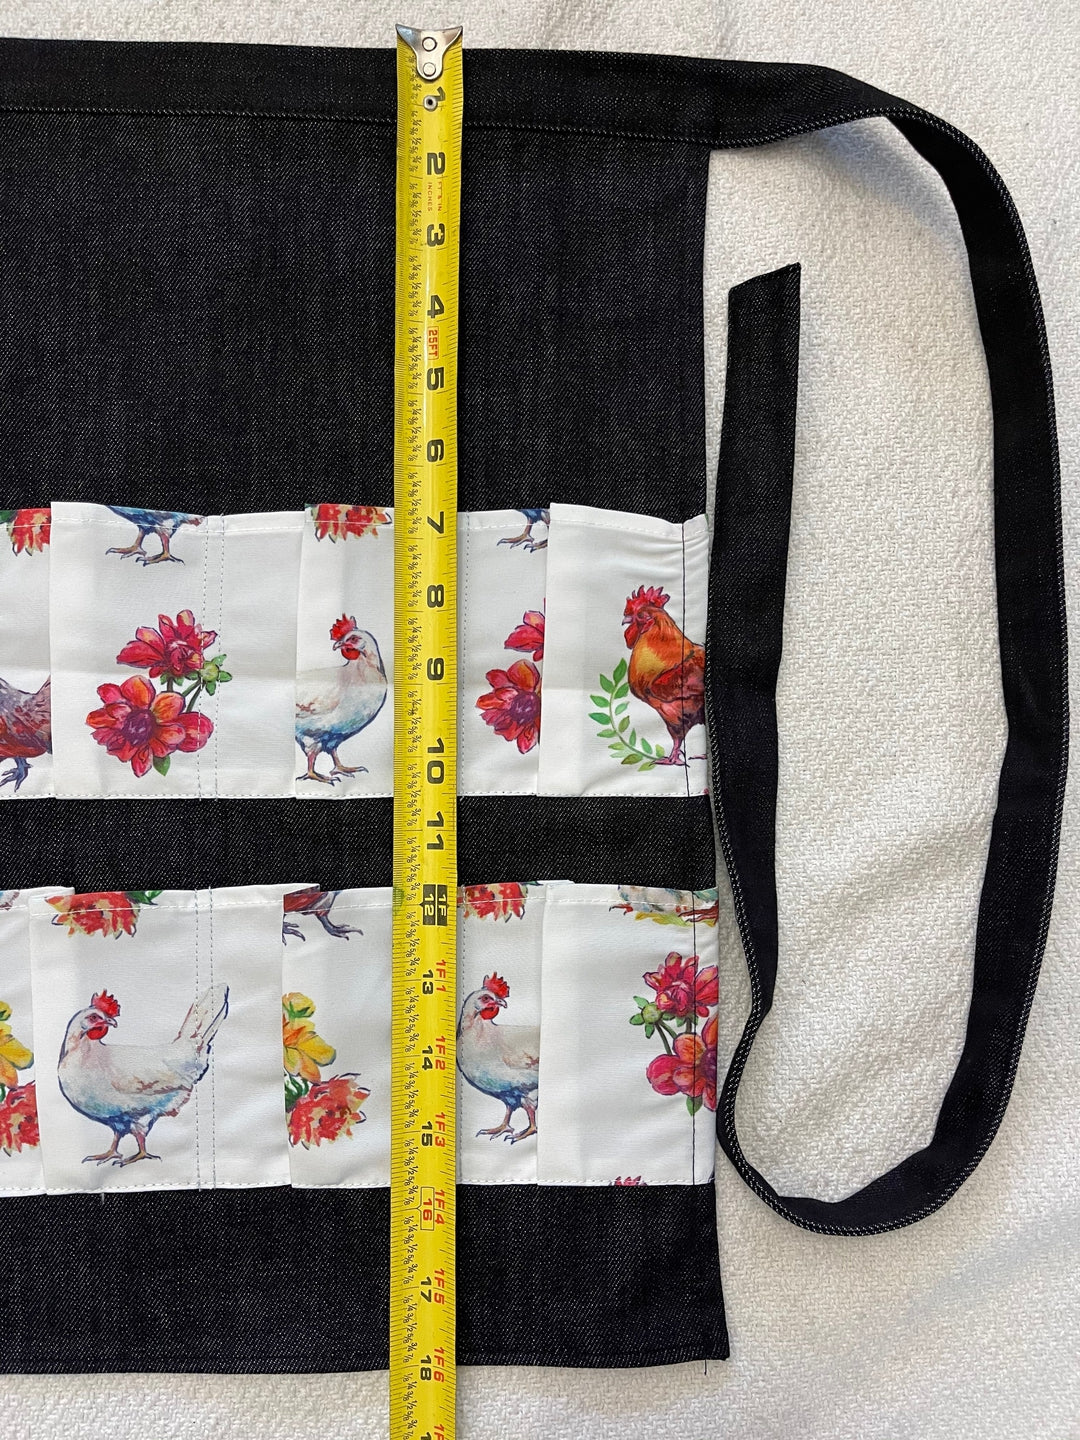 Egg Collecting Apron, 12 Hen Pockets With Hen Rooster Print And